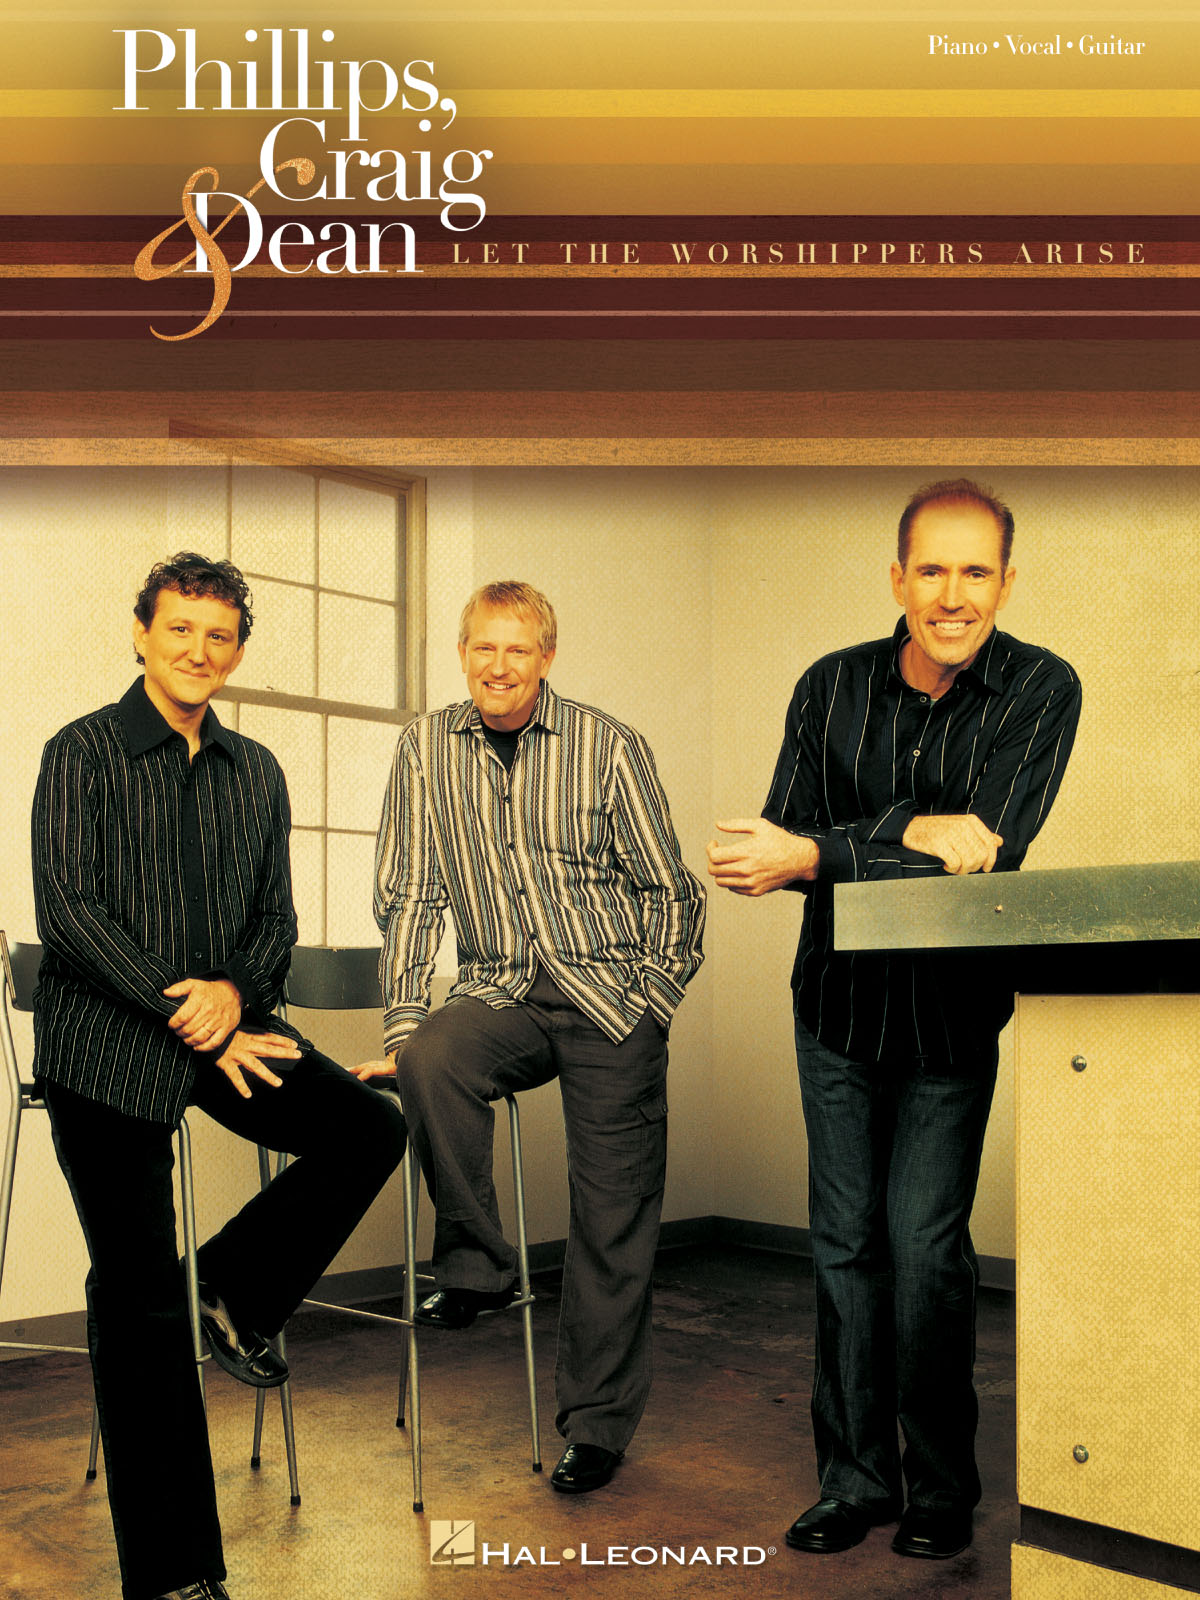 Phillips  Craig and Dean: Phillips  Craig & Dean - Let the Worshippers Arise: